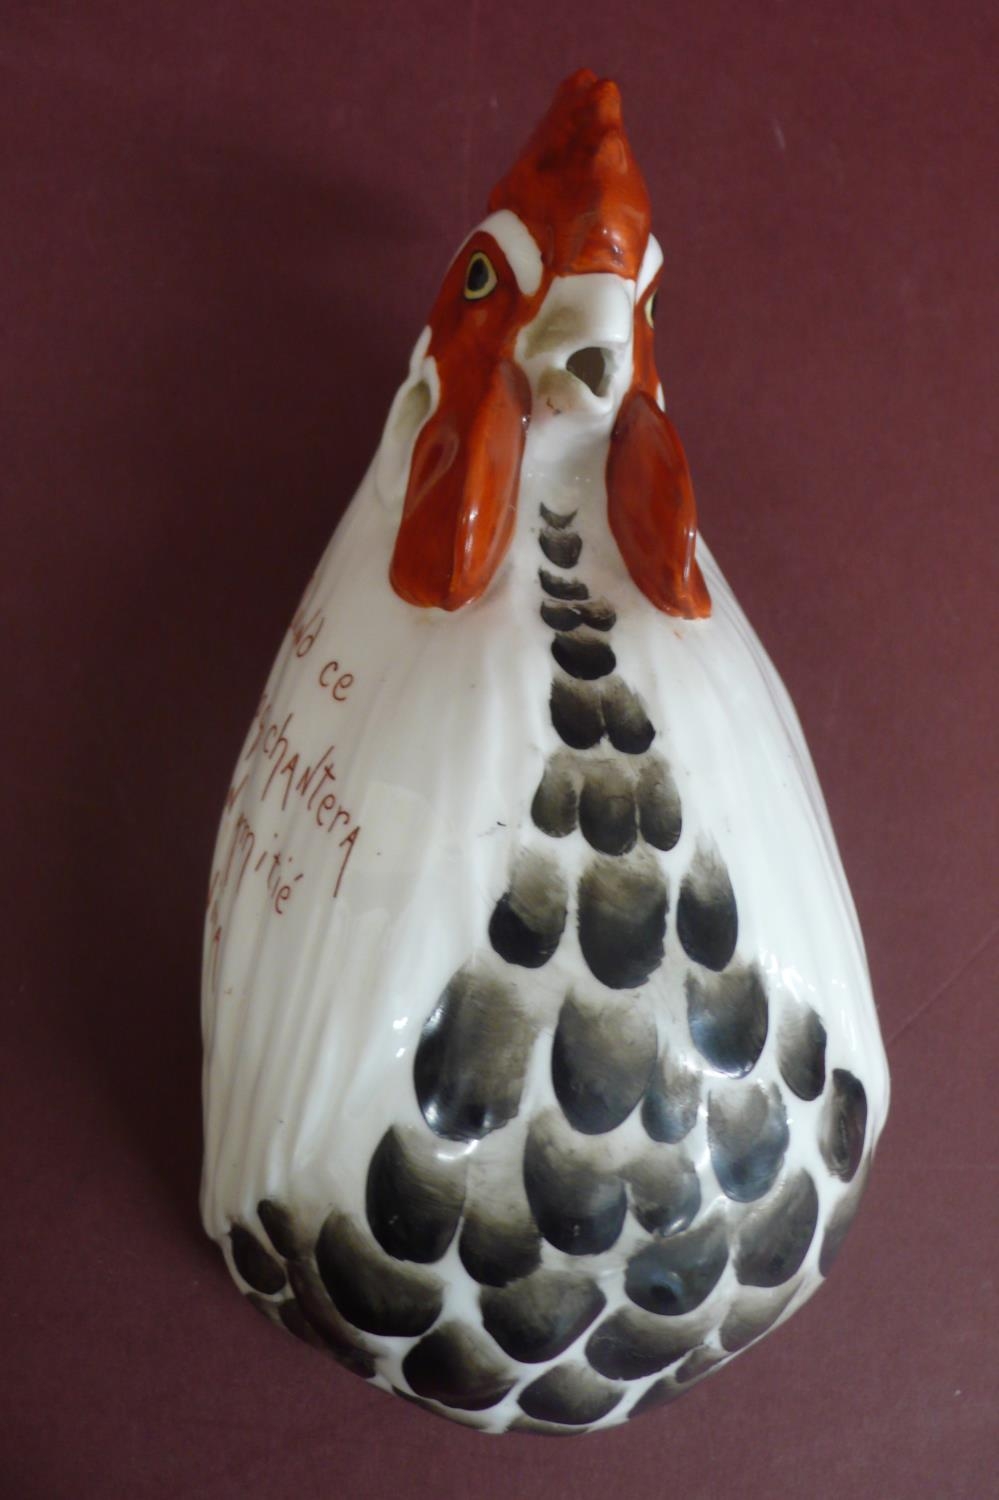 Rare Royal Worcester porcelain wall ornament of a cockerel marked "Quand ce coq Chantera mon